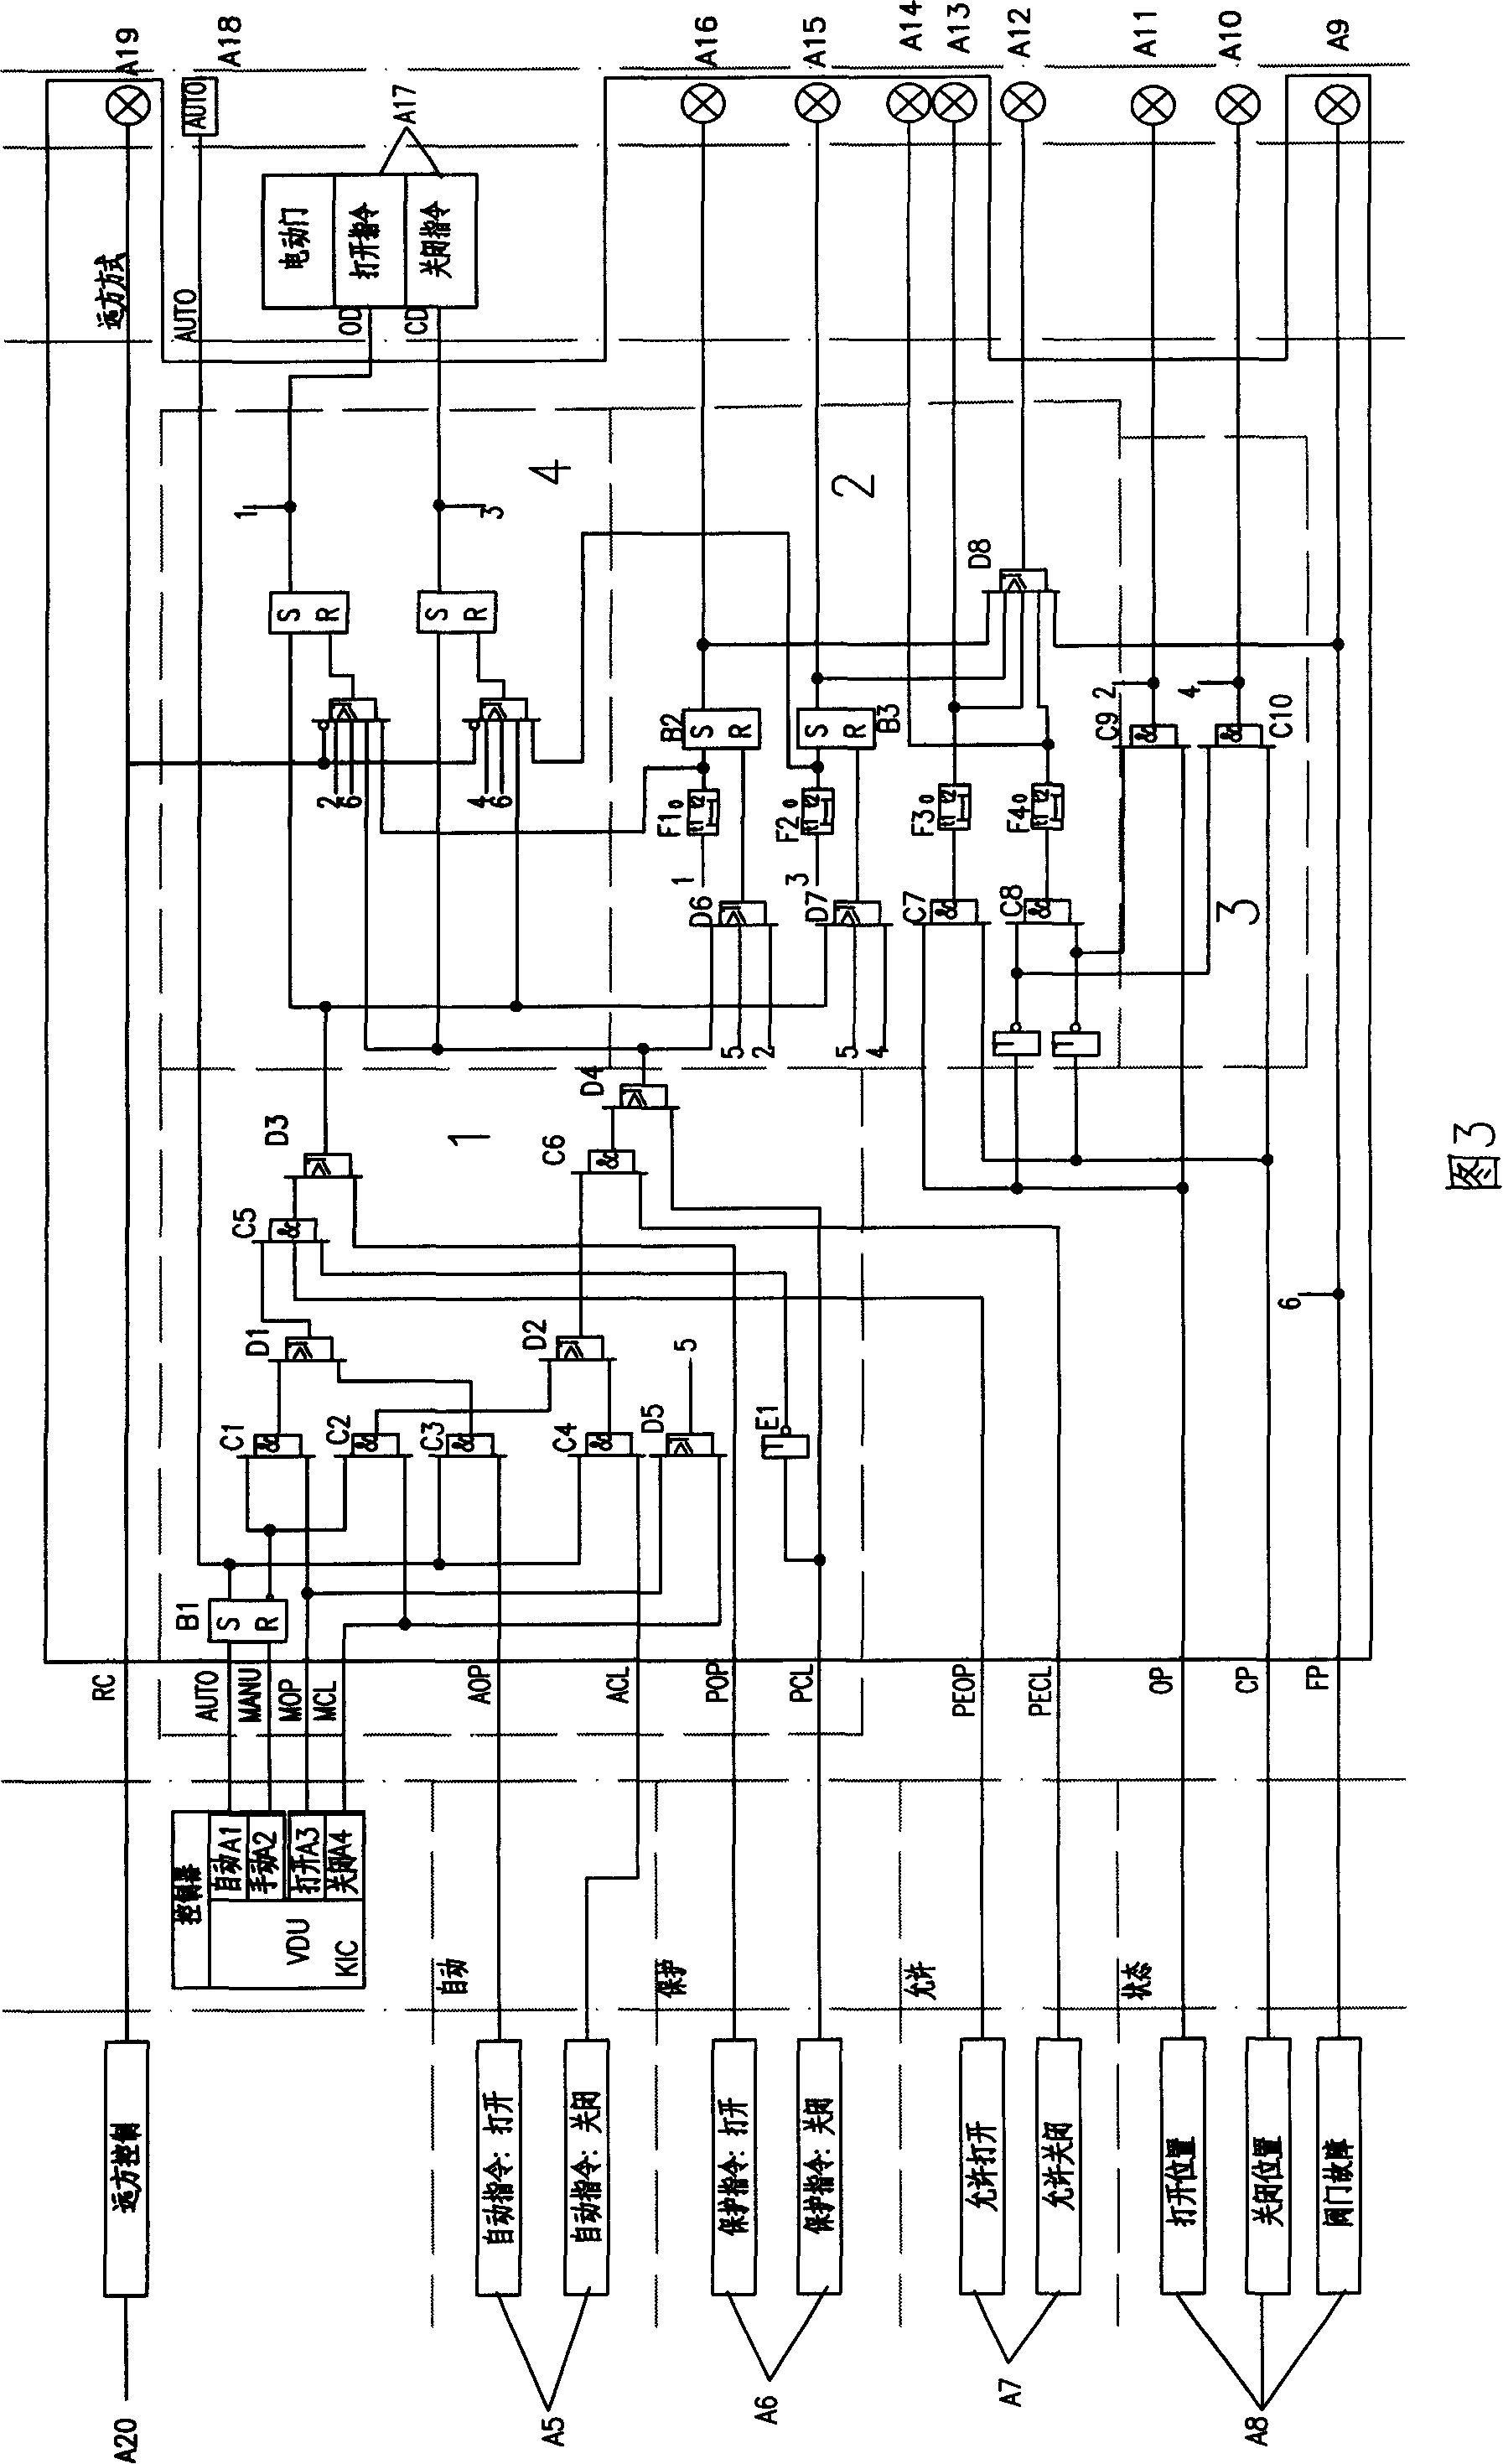 Special logic control device for nucleus electromotor unit drive